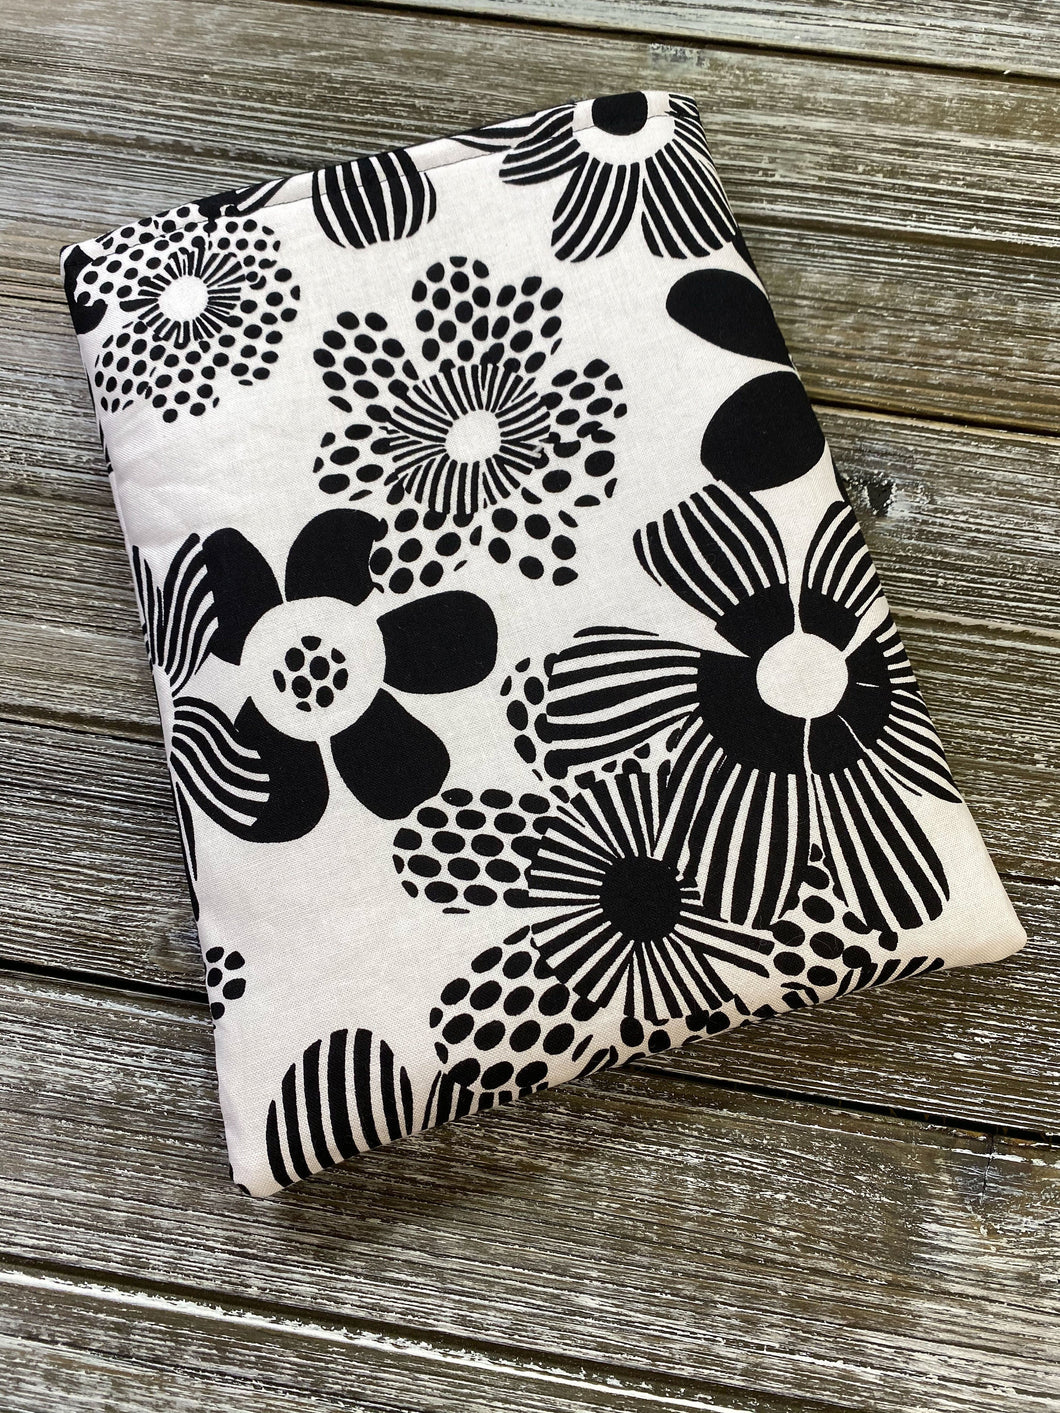 Groovy Black & White Big Bold Print Padded Book Sleeve | Book Pocket | Protective Book Bag | Book Pouch | Bookish Nerd Kindle Accessory